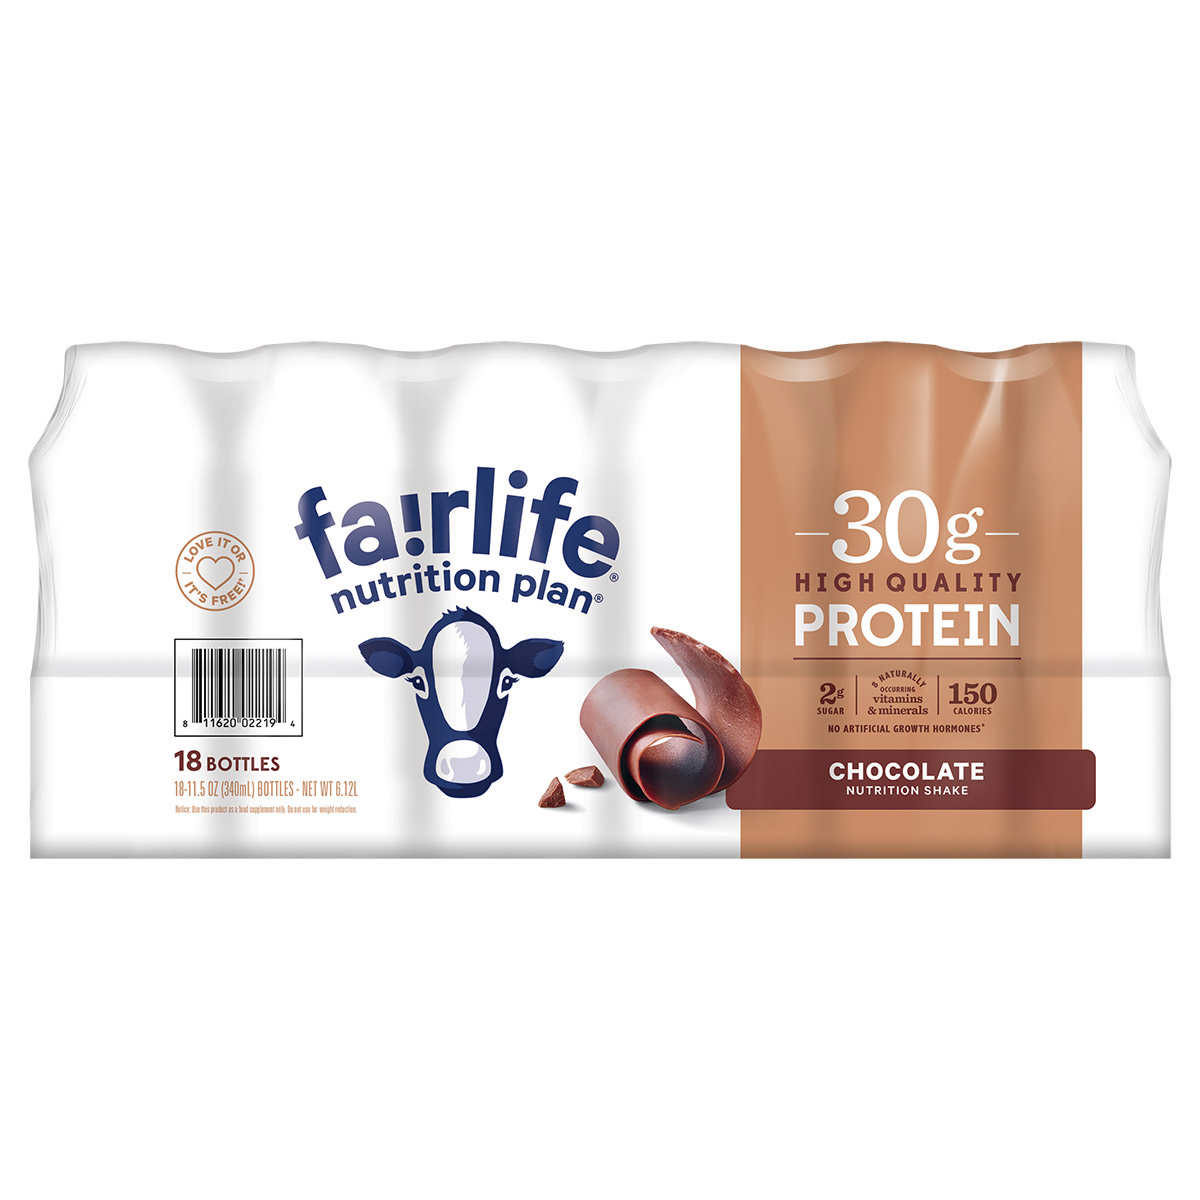 Fairlife Nutrition Plan, 30g Protein Shake, Chocolate, 11.5 oz, 18-count